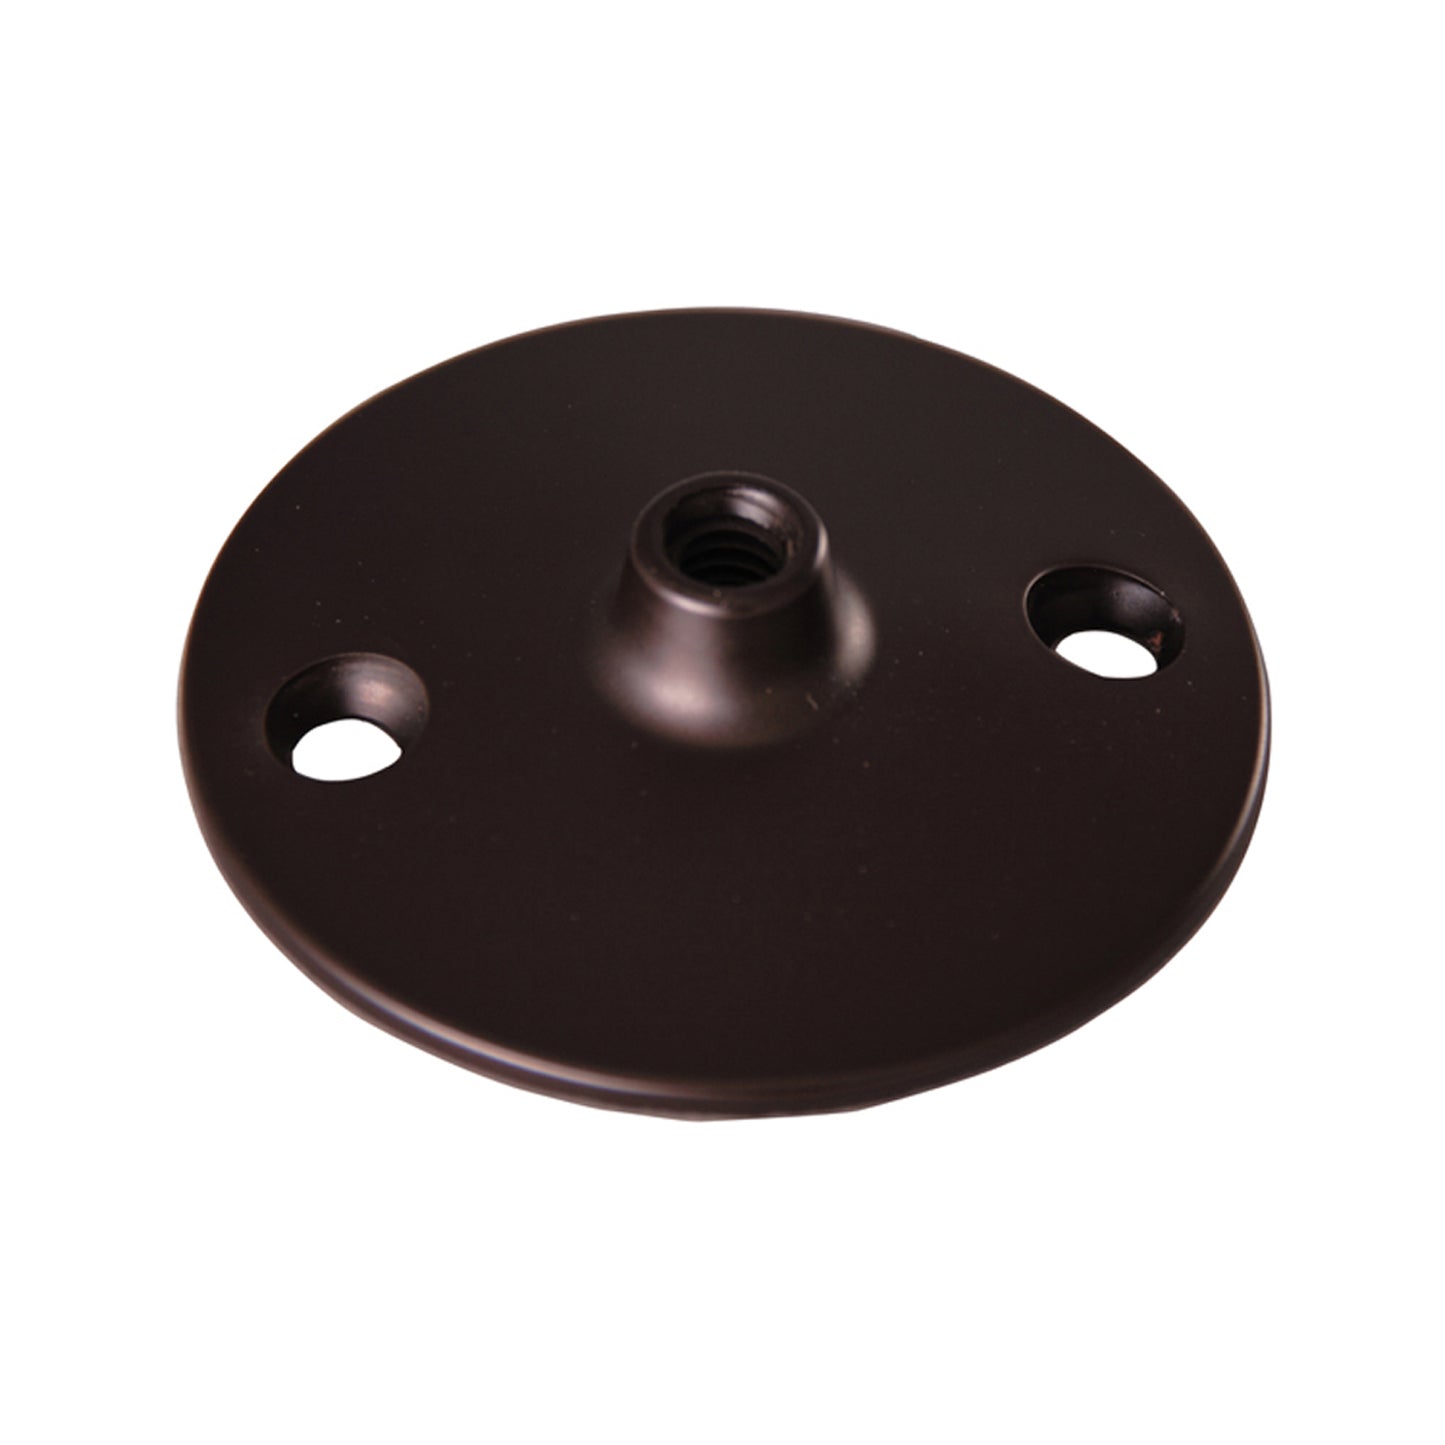 Flange for 340 Ceiling Support Oil Rubbed Bronze